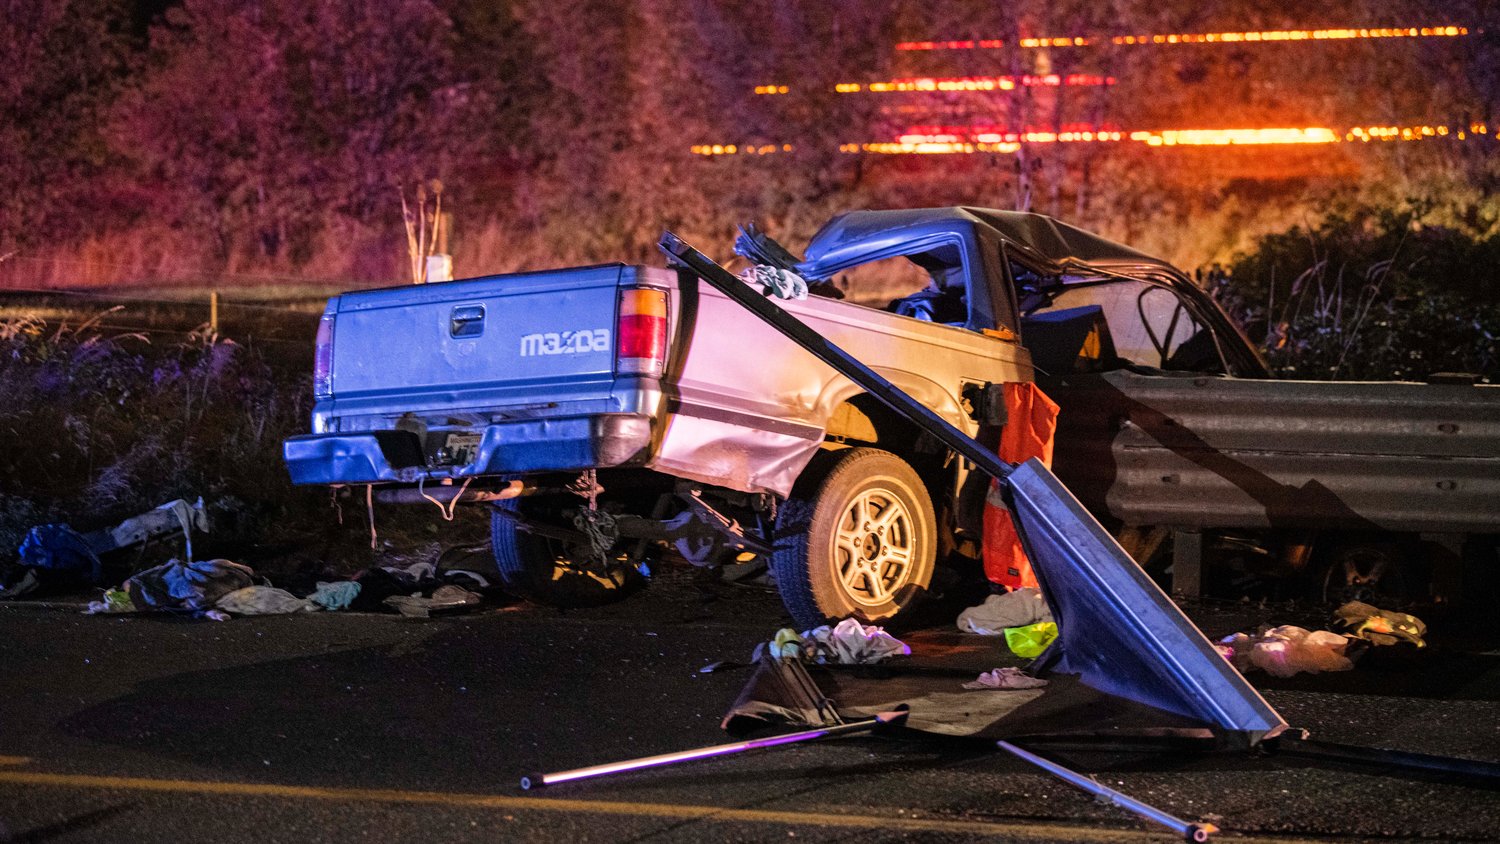 A 25-year-old Chehalis man was airlifted to Harborview Medical Center in Seattle after he crashed into a guardrail in the 2500 block of Airport Road Wednesday evening. 